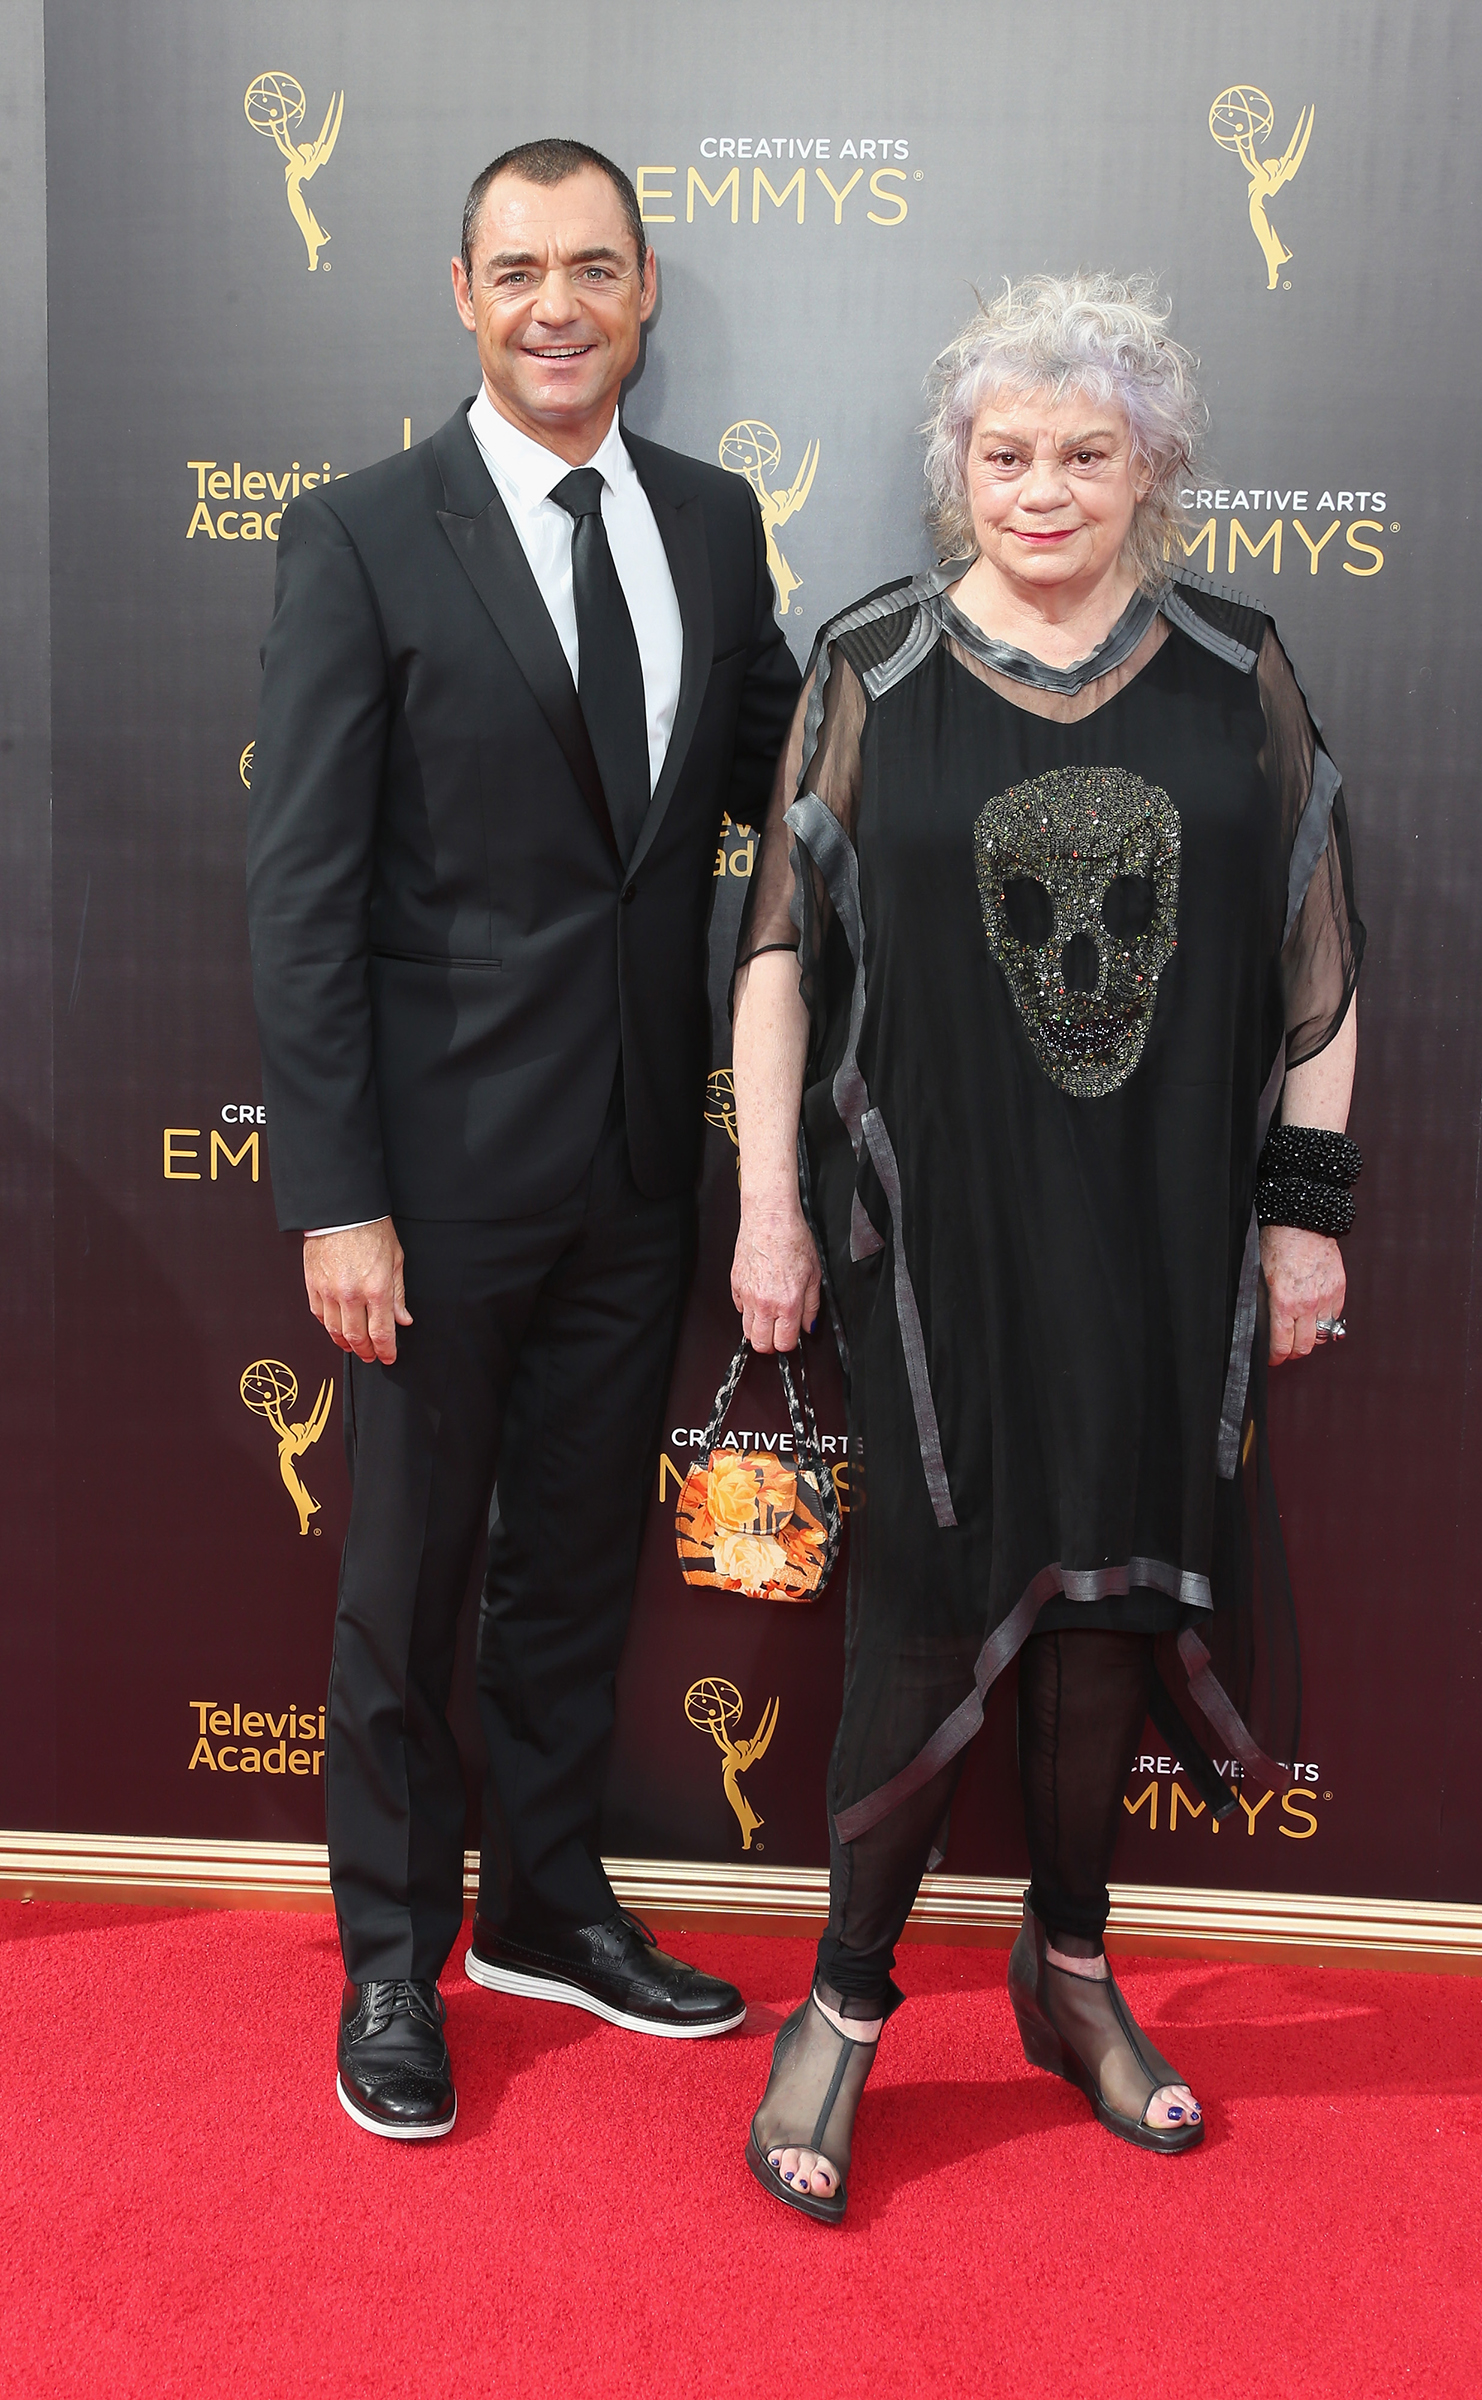 Casting director Moonyeenn Lee (R) attends the 2016 Creative Arts Emmy Awards in Los Angeles on September 10, 2016. (Frederick M. Brown—Getty Images)